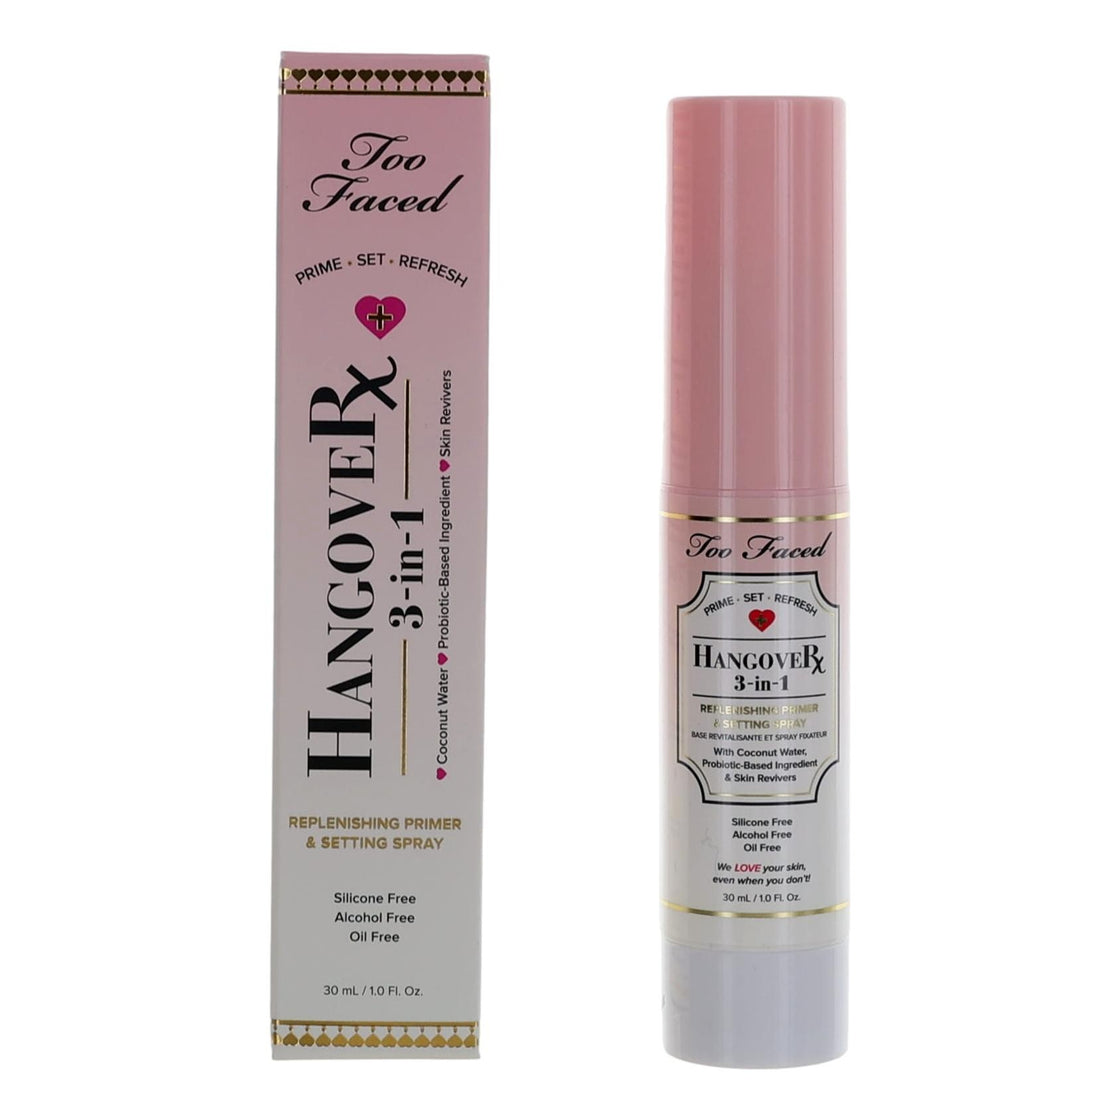 Too Faced Hangover Rx By Too Faced, 1 Oz 3-In-1 Primer And Setting Spray